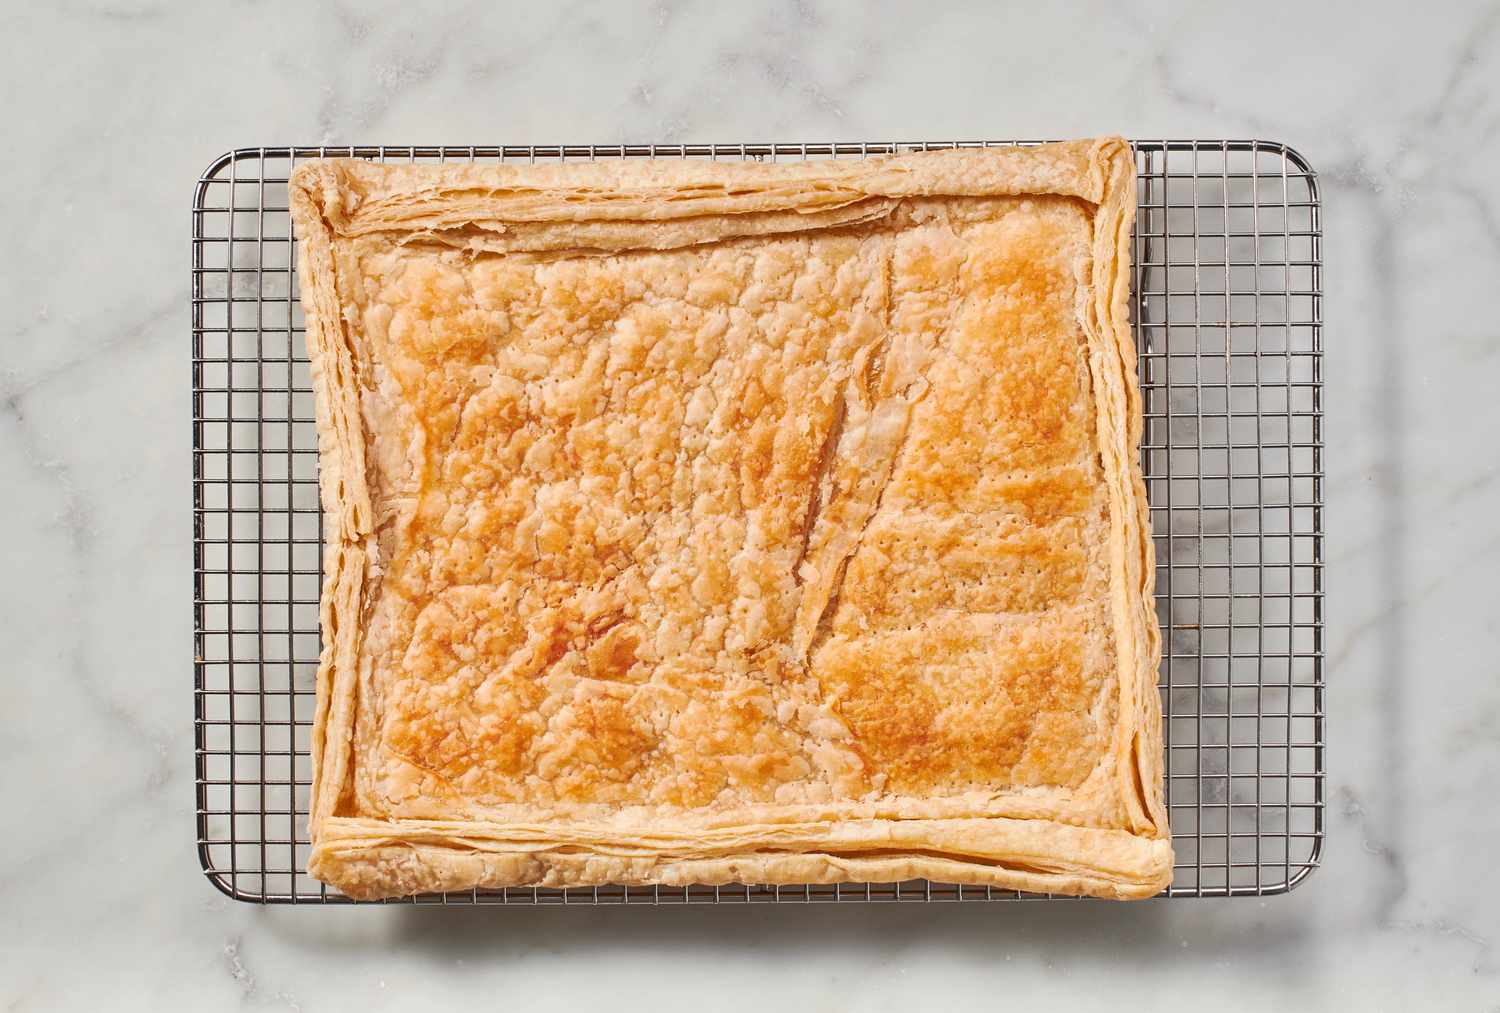 A partially baked puff pastry crust on a cooling rack